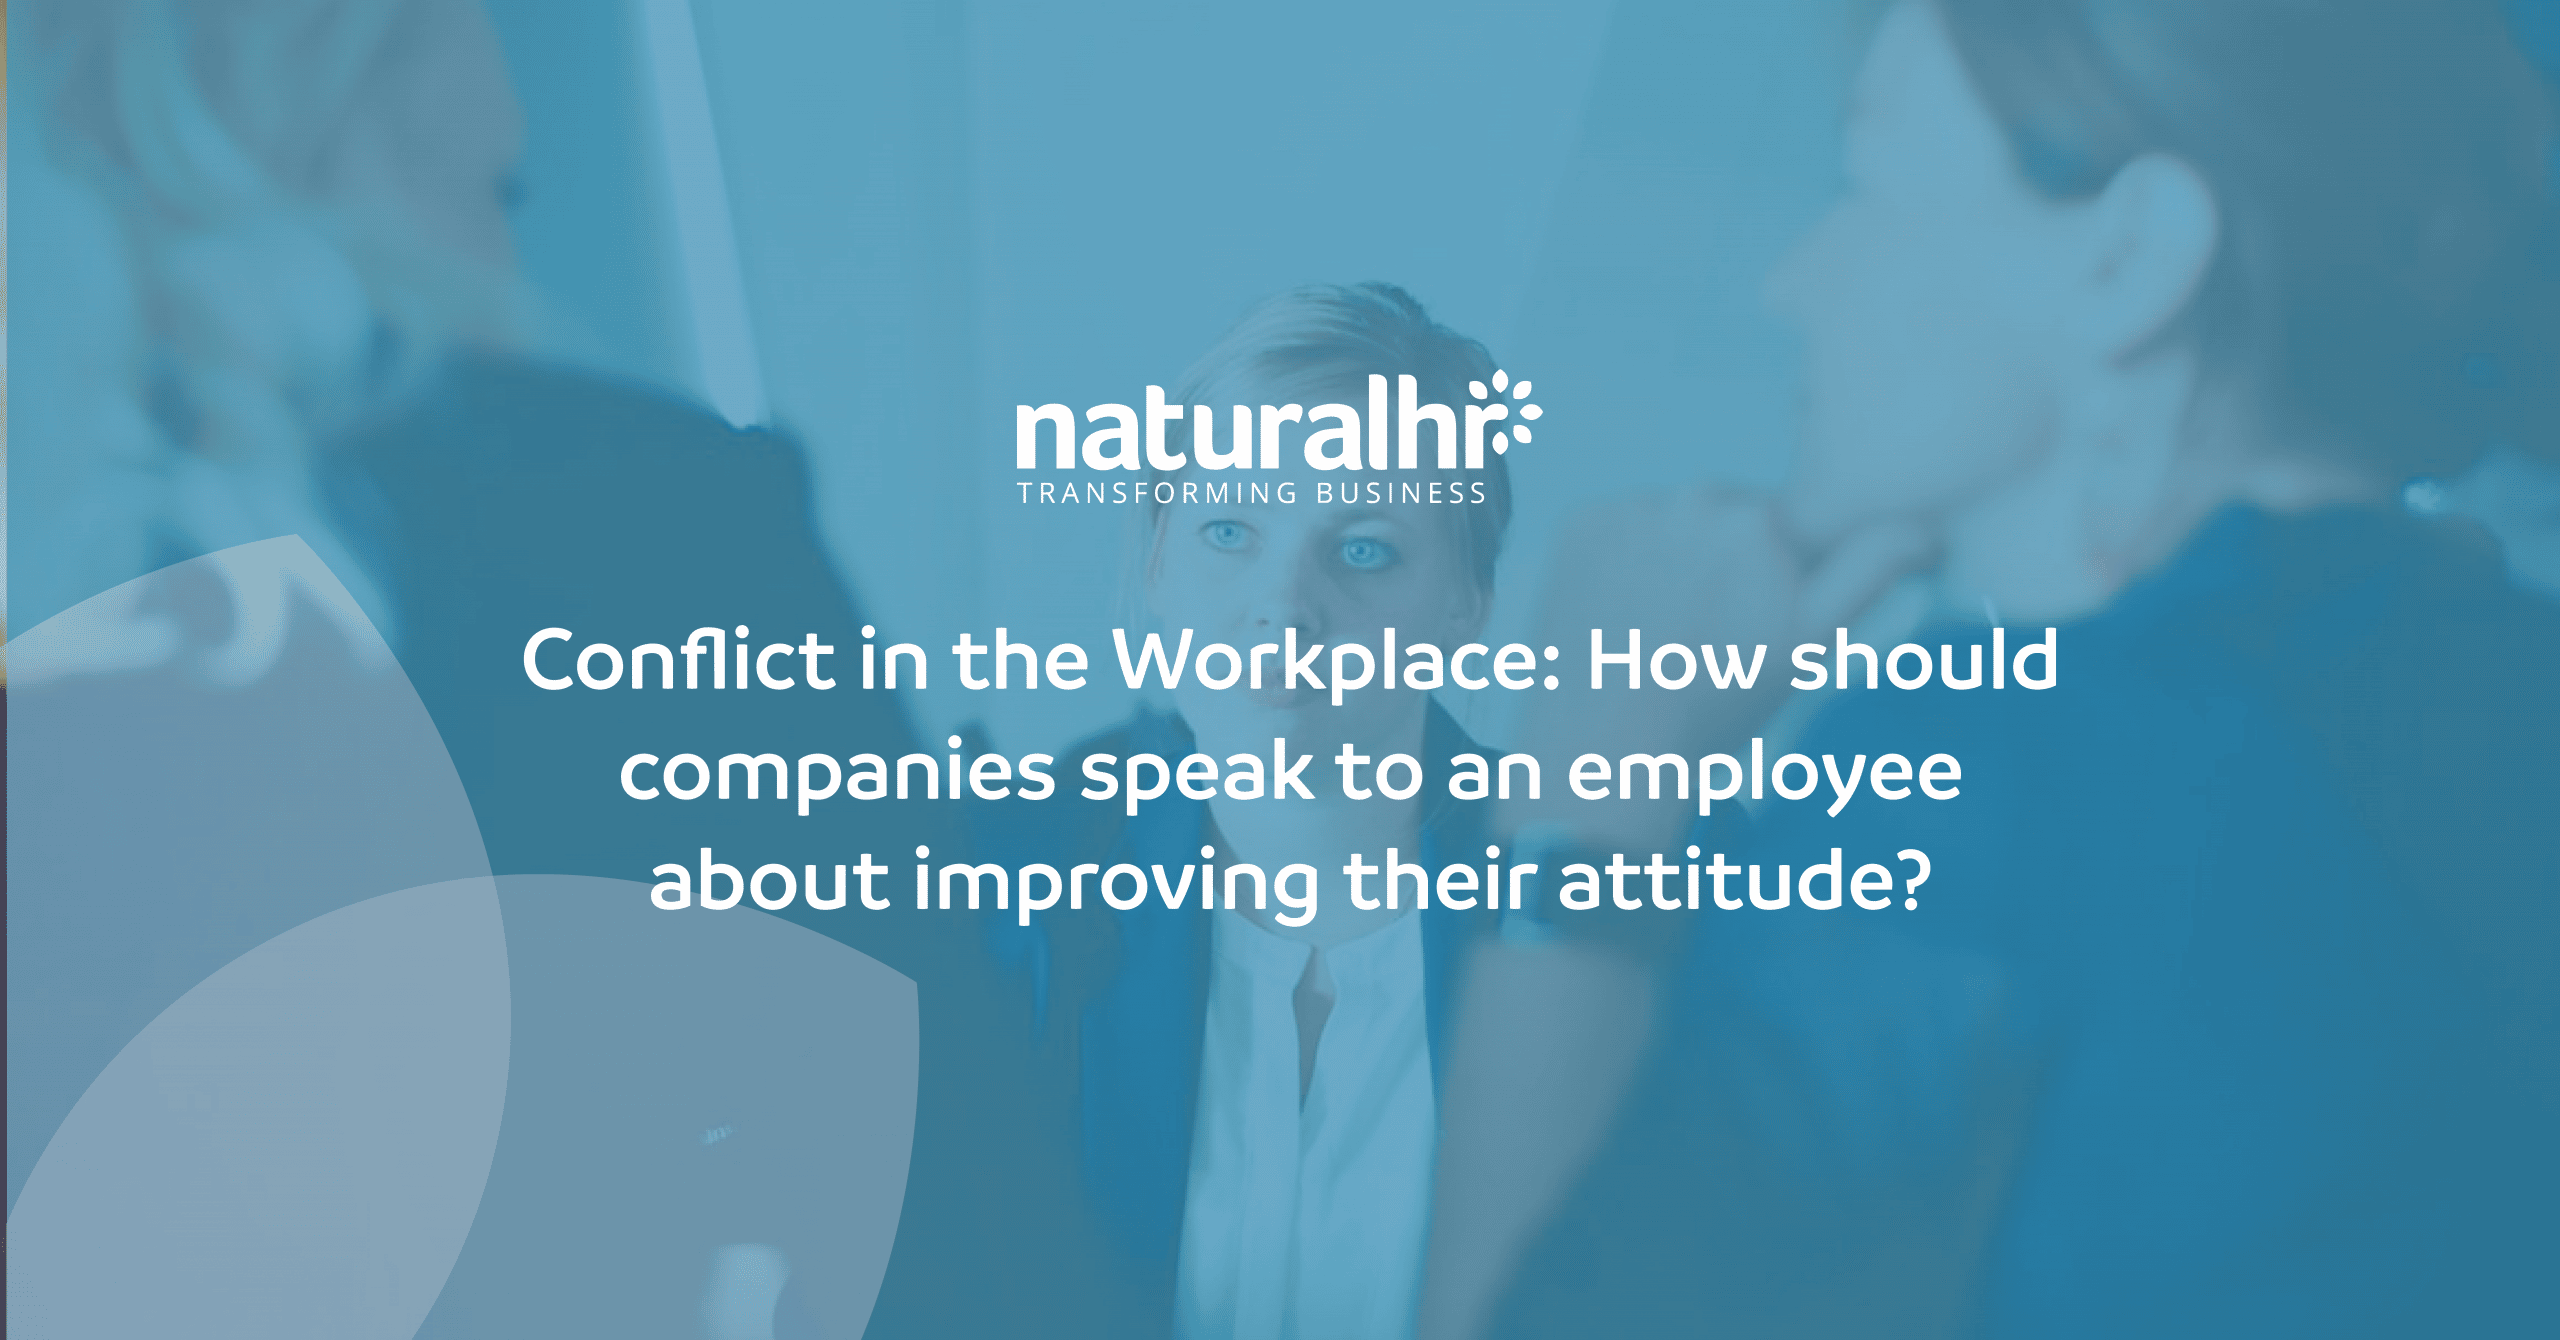 Conflict in the workplace: How should companies speak to an employee about improving their attitude?